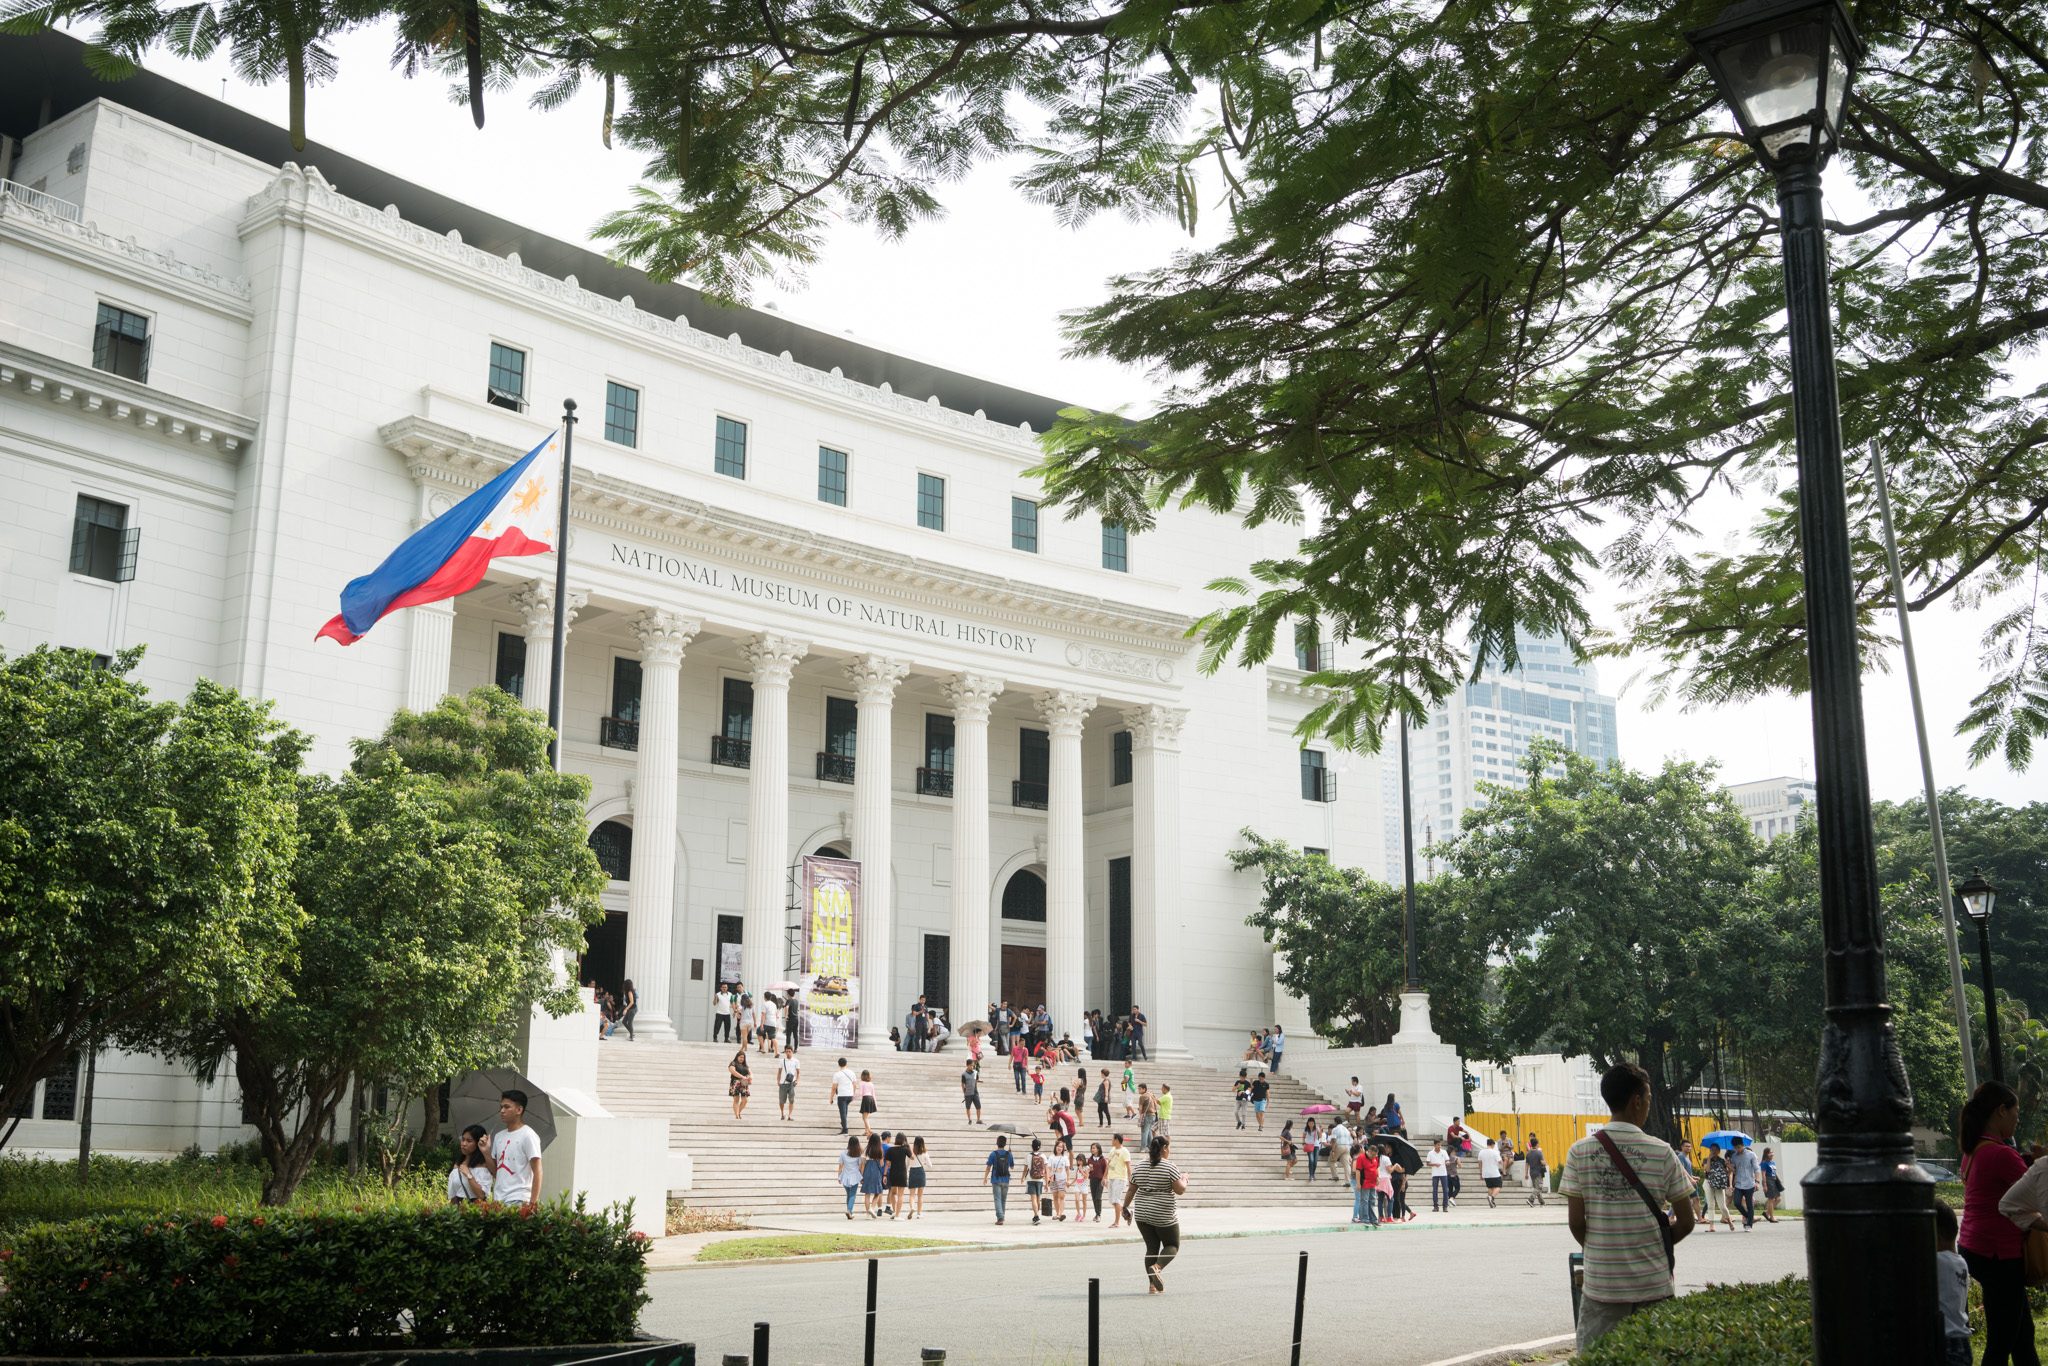 IN PHOTOS: A preview of the National Museum of Natural History